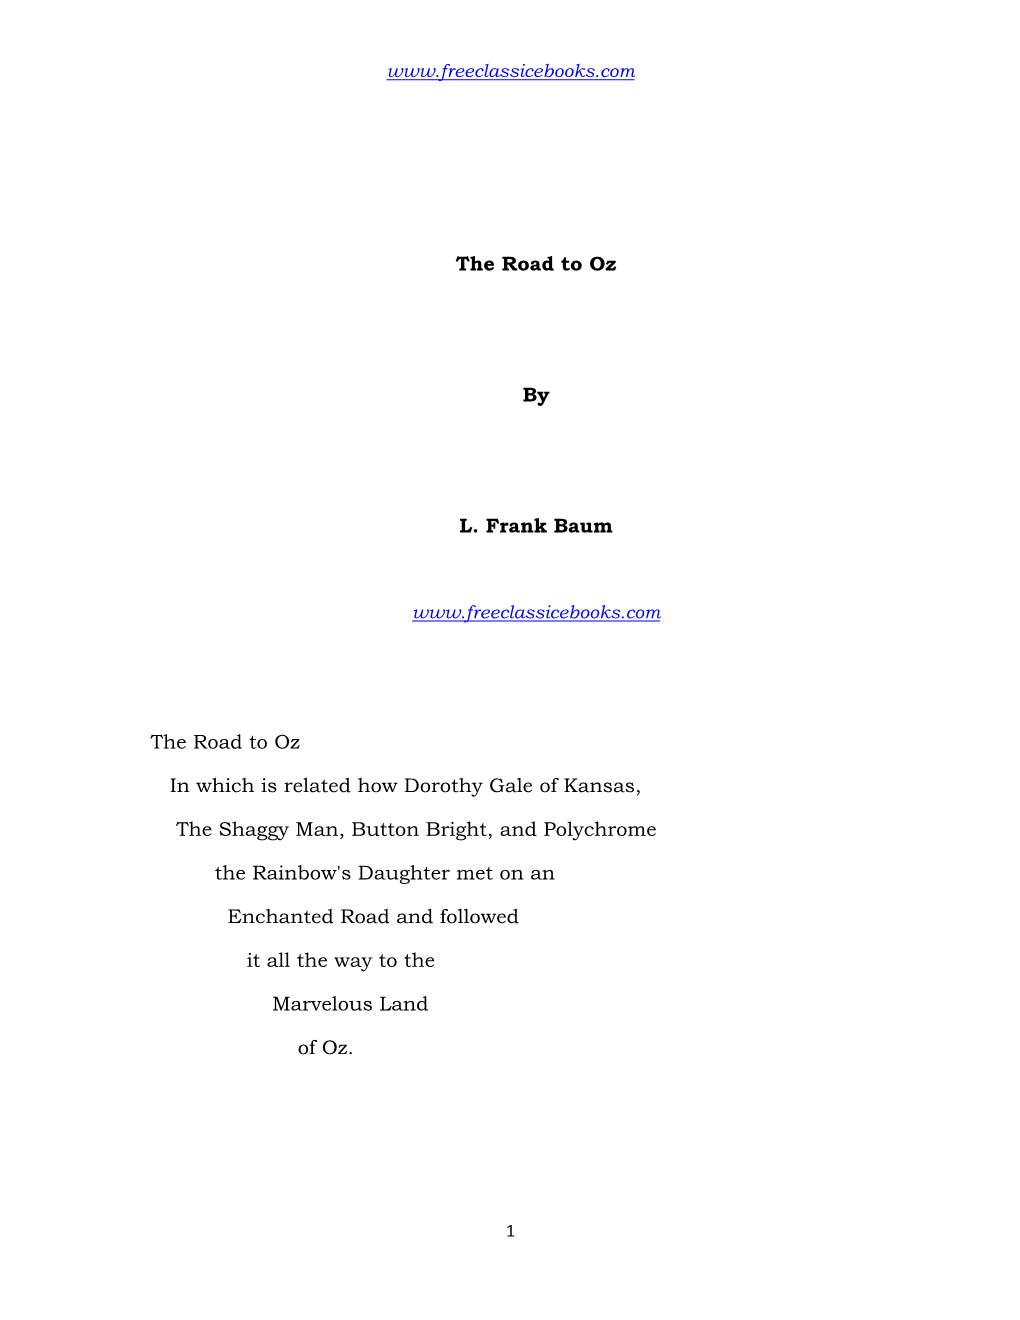 The Road to Oz by L. Frank Baum the Road to Oz in Which Is Related How